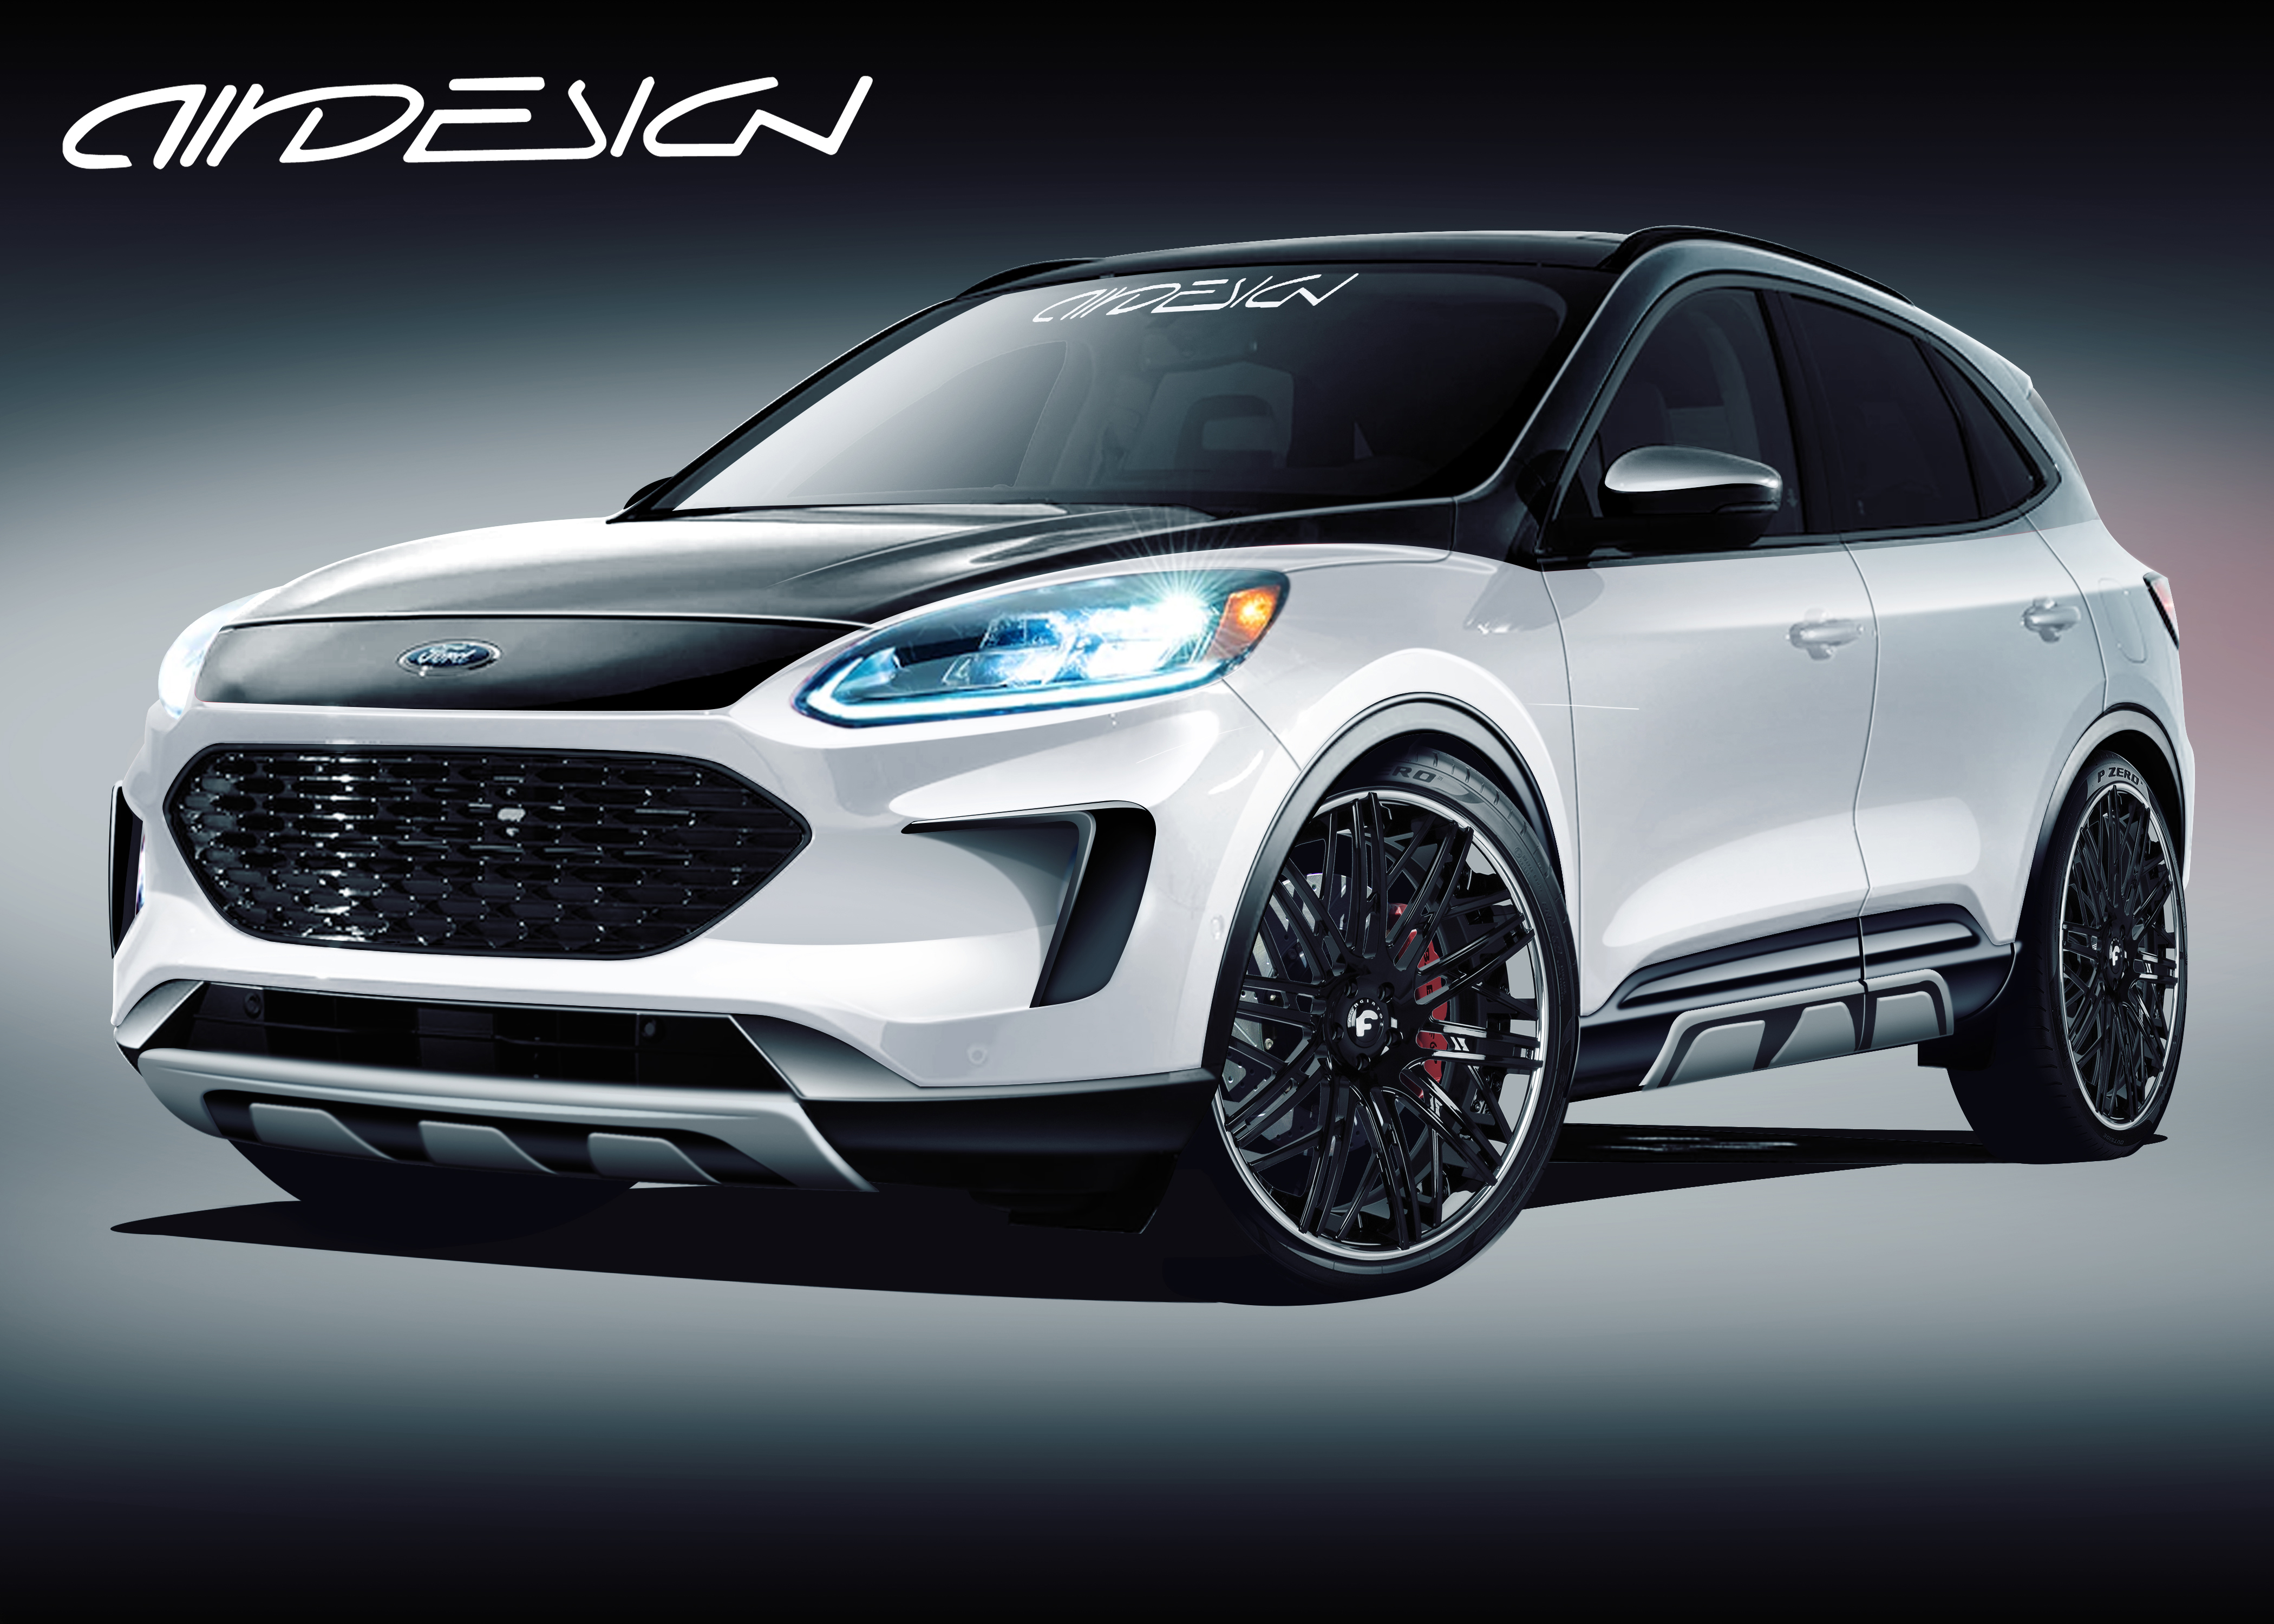 Ford to Exhibit More Than 50 Customized Vehicles at 2019 SEMA Show